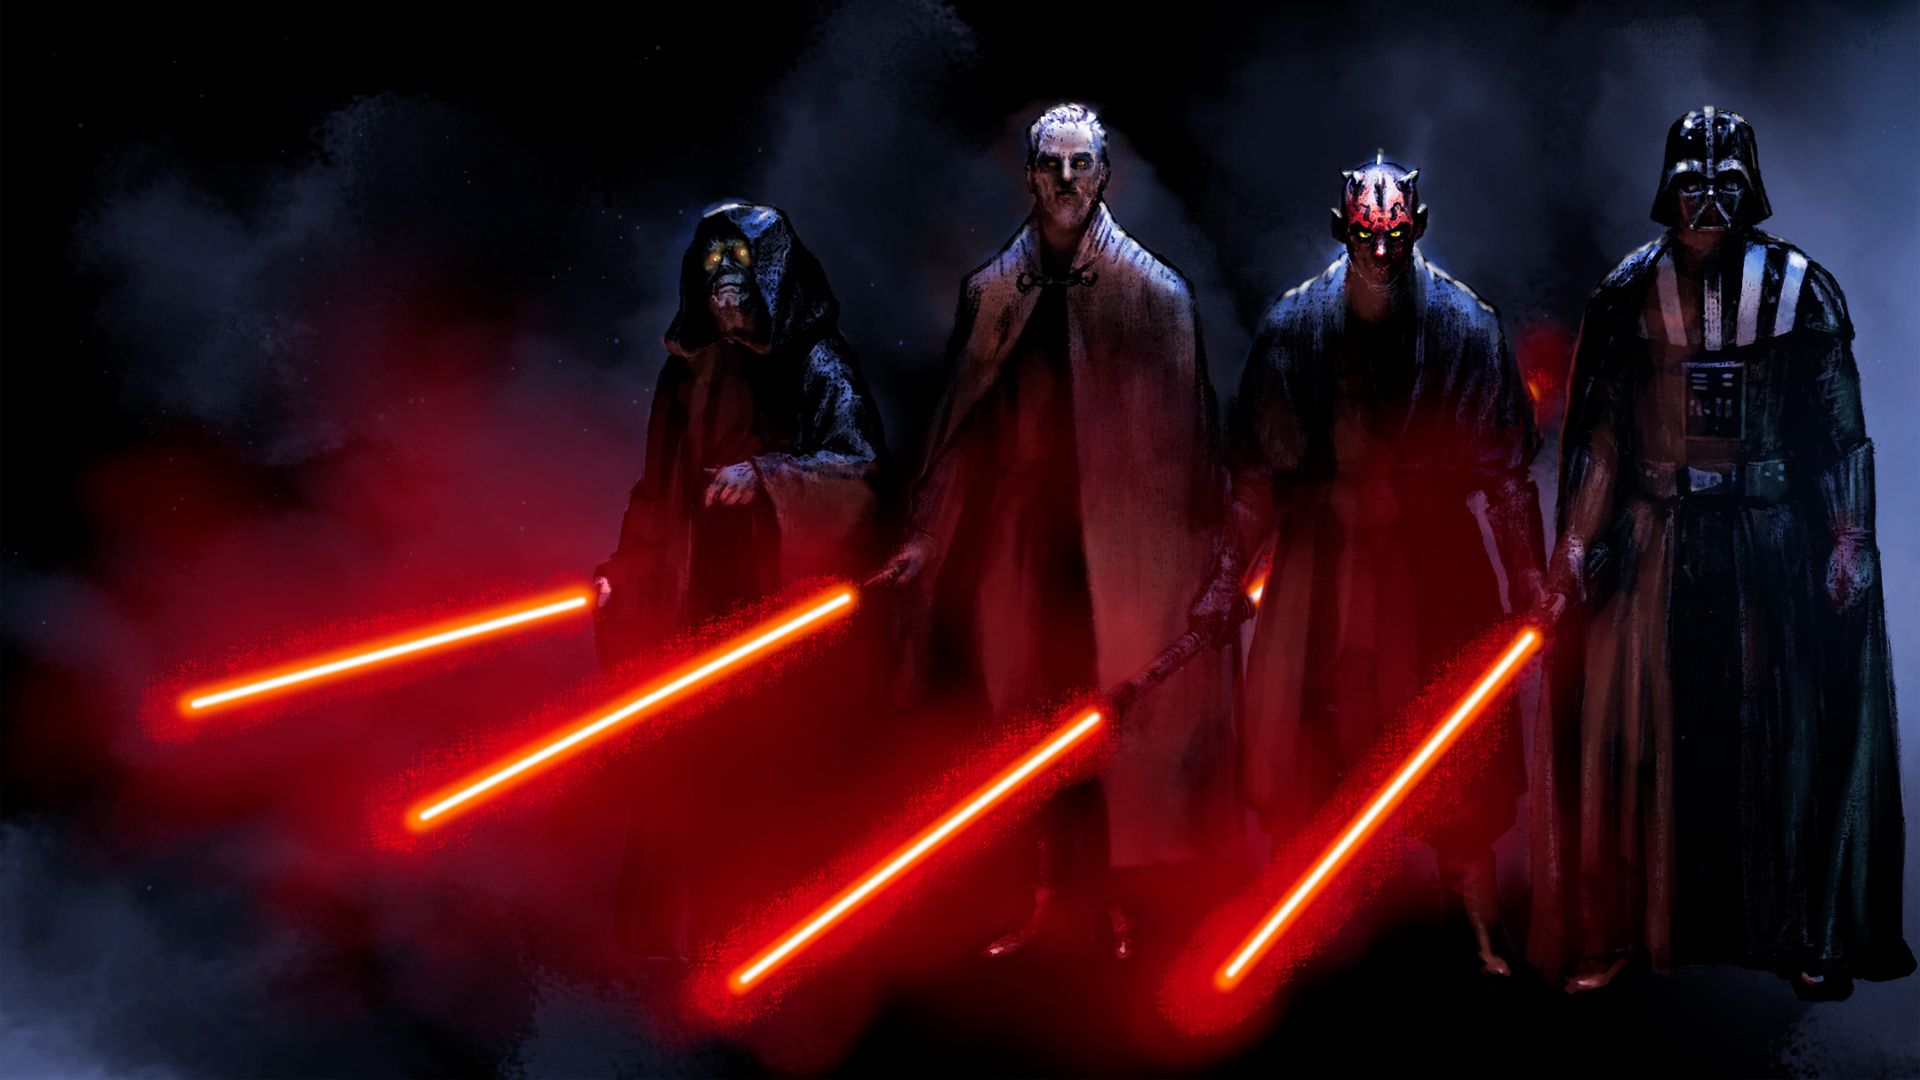 Sith Lords Computer Wallpapers, Desktop Backgrounds | 1920x1080 ...